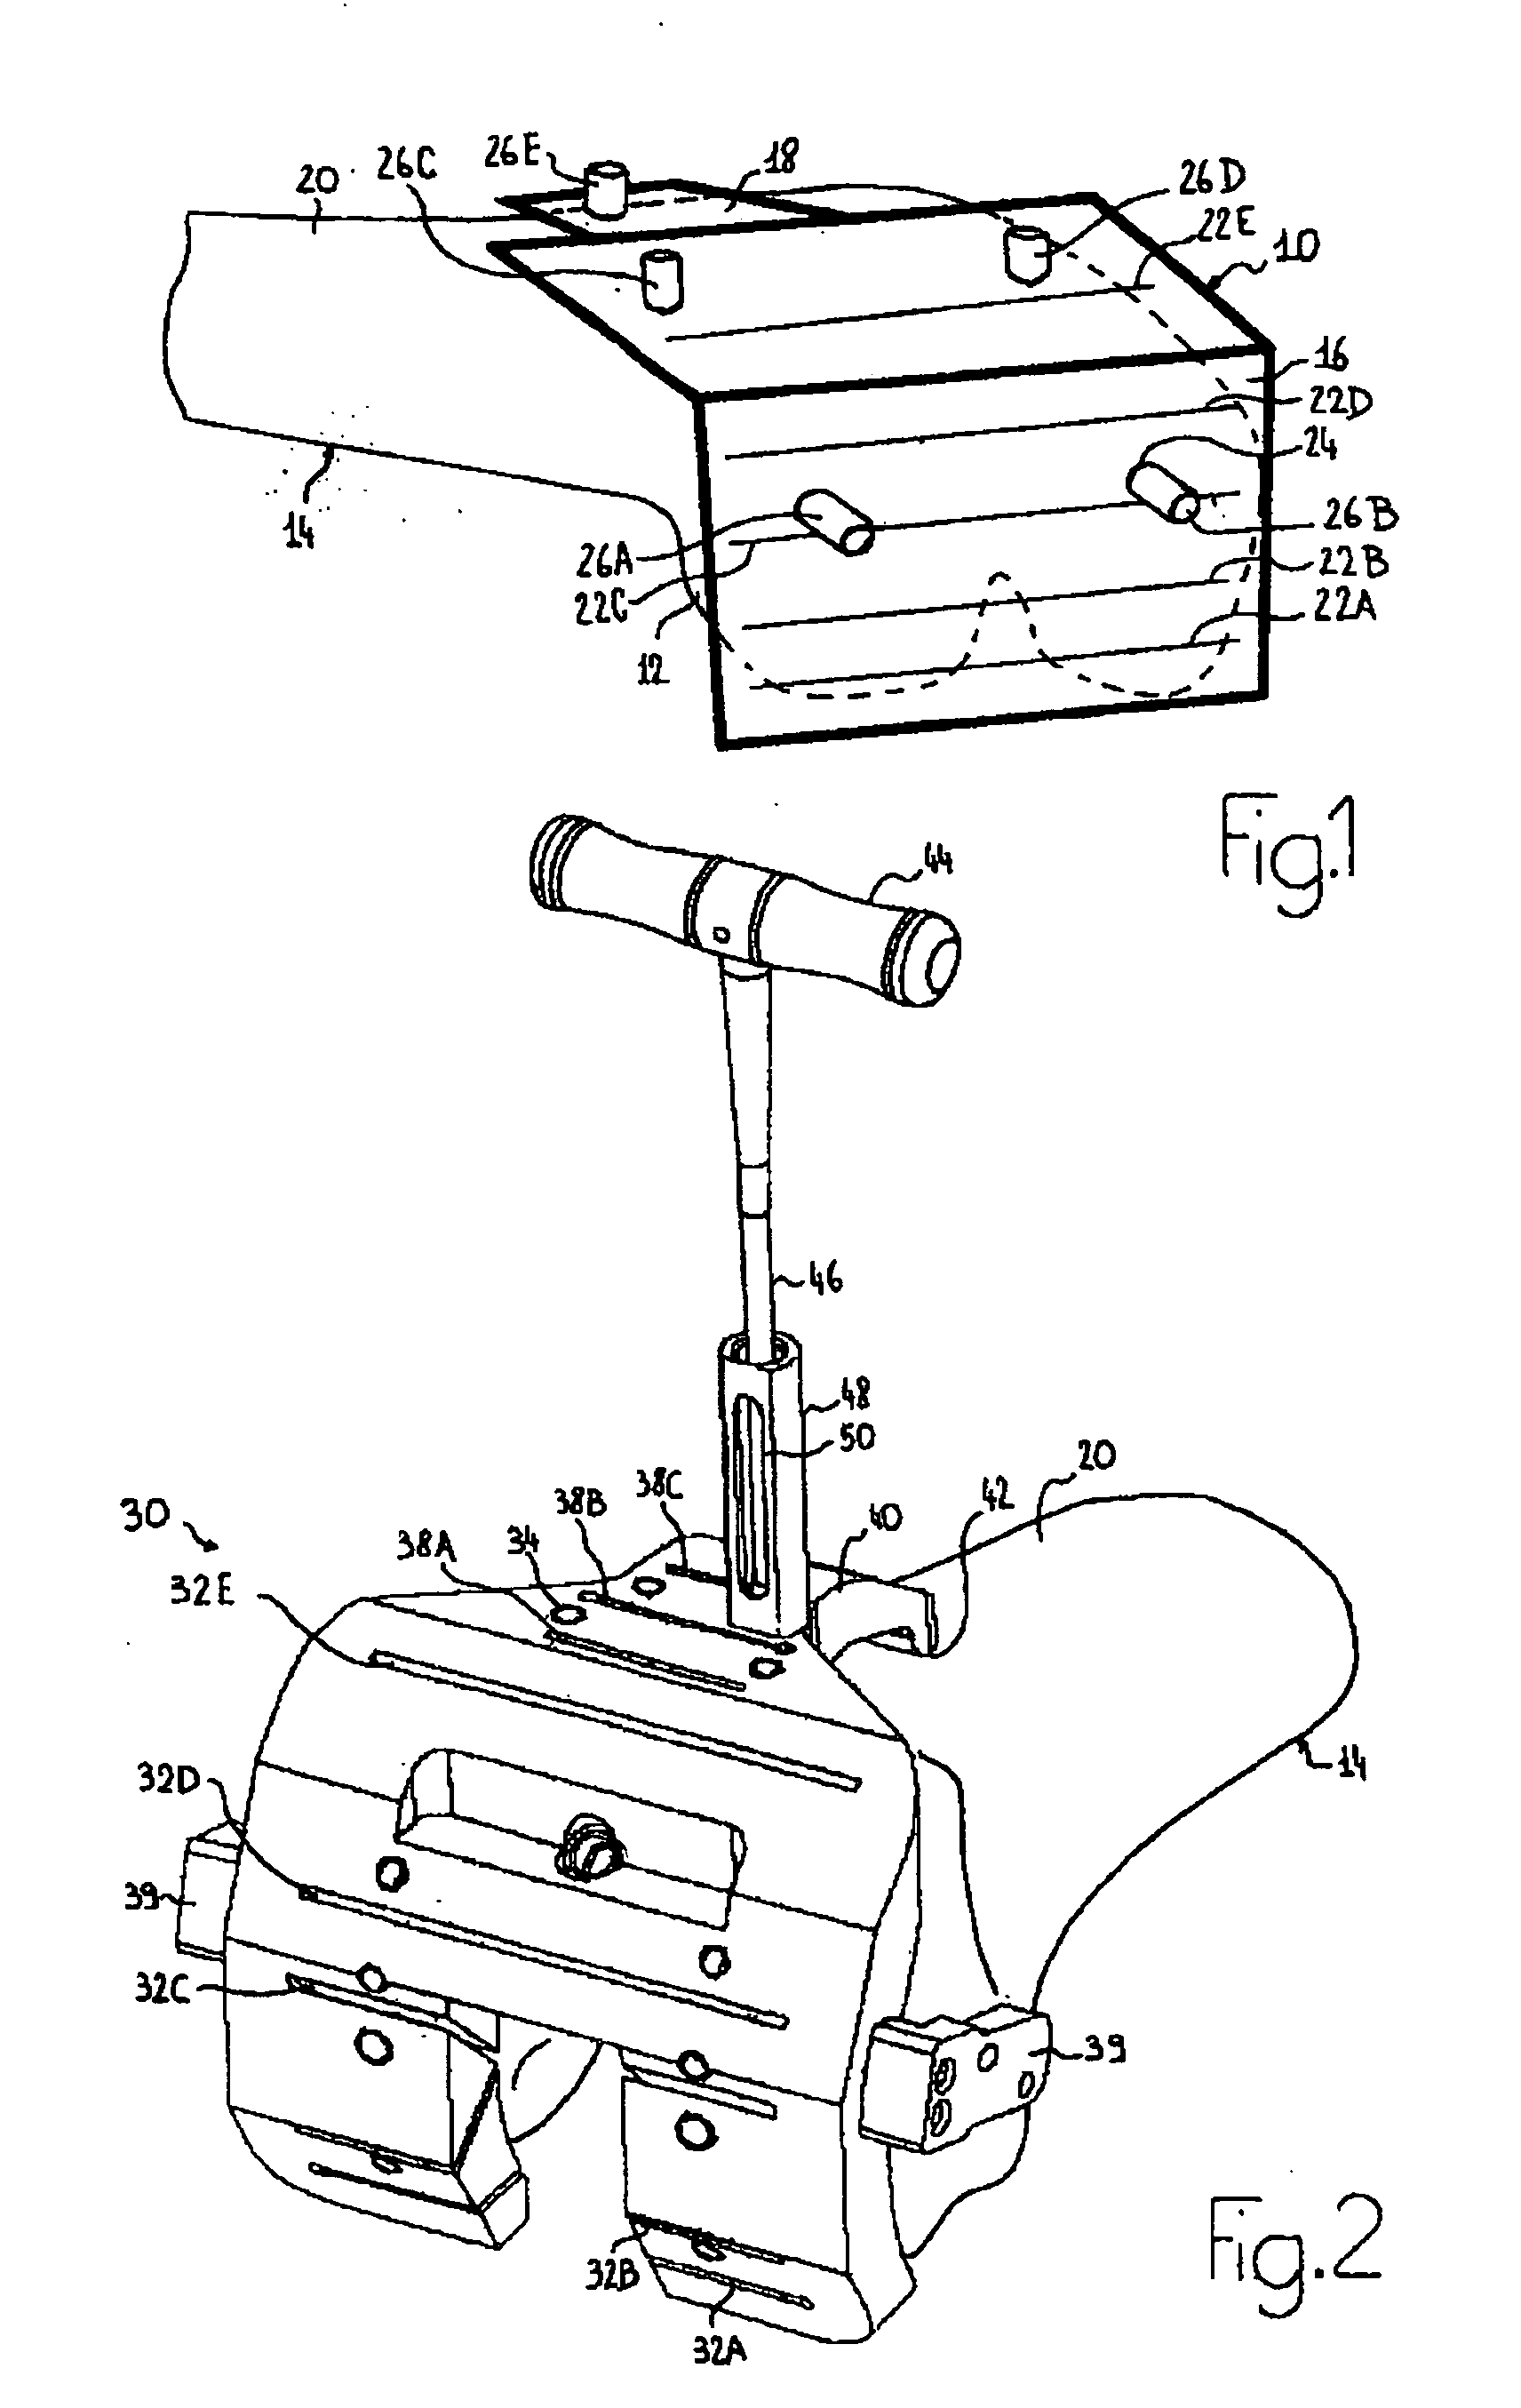 Device for positioning a bone cutting guide